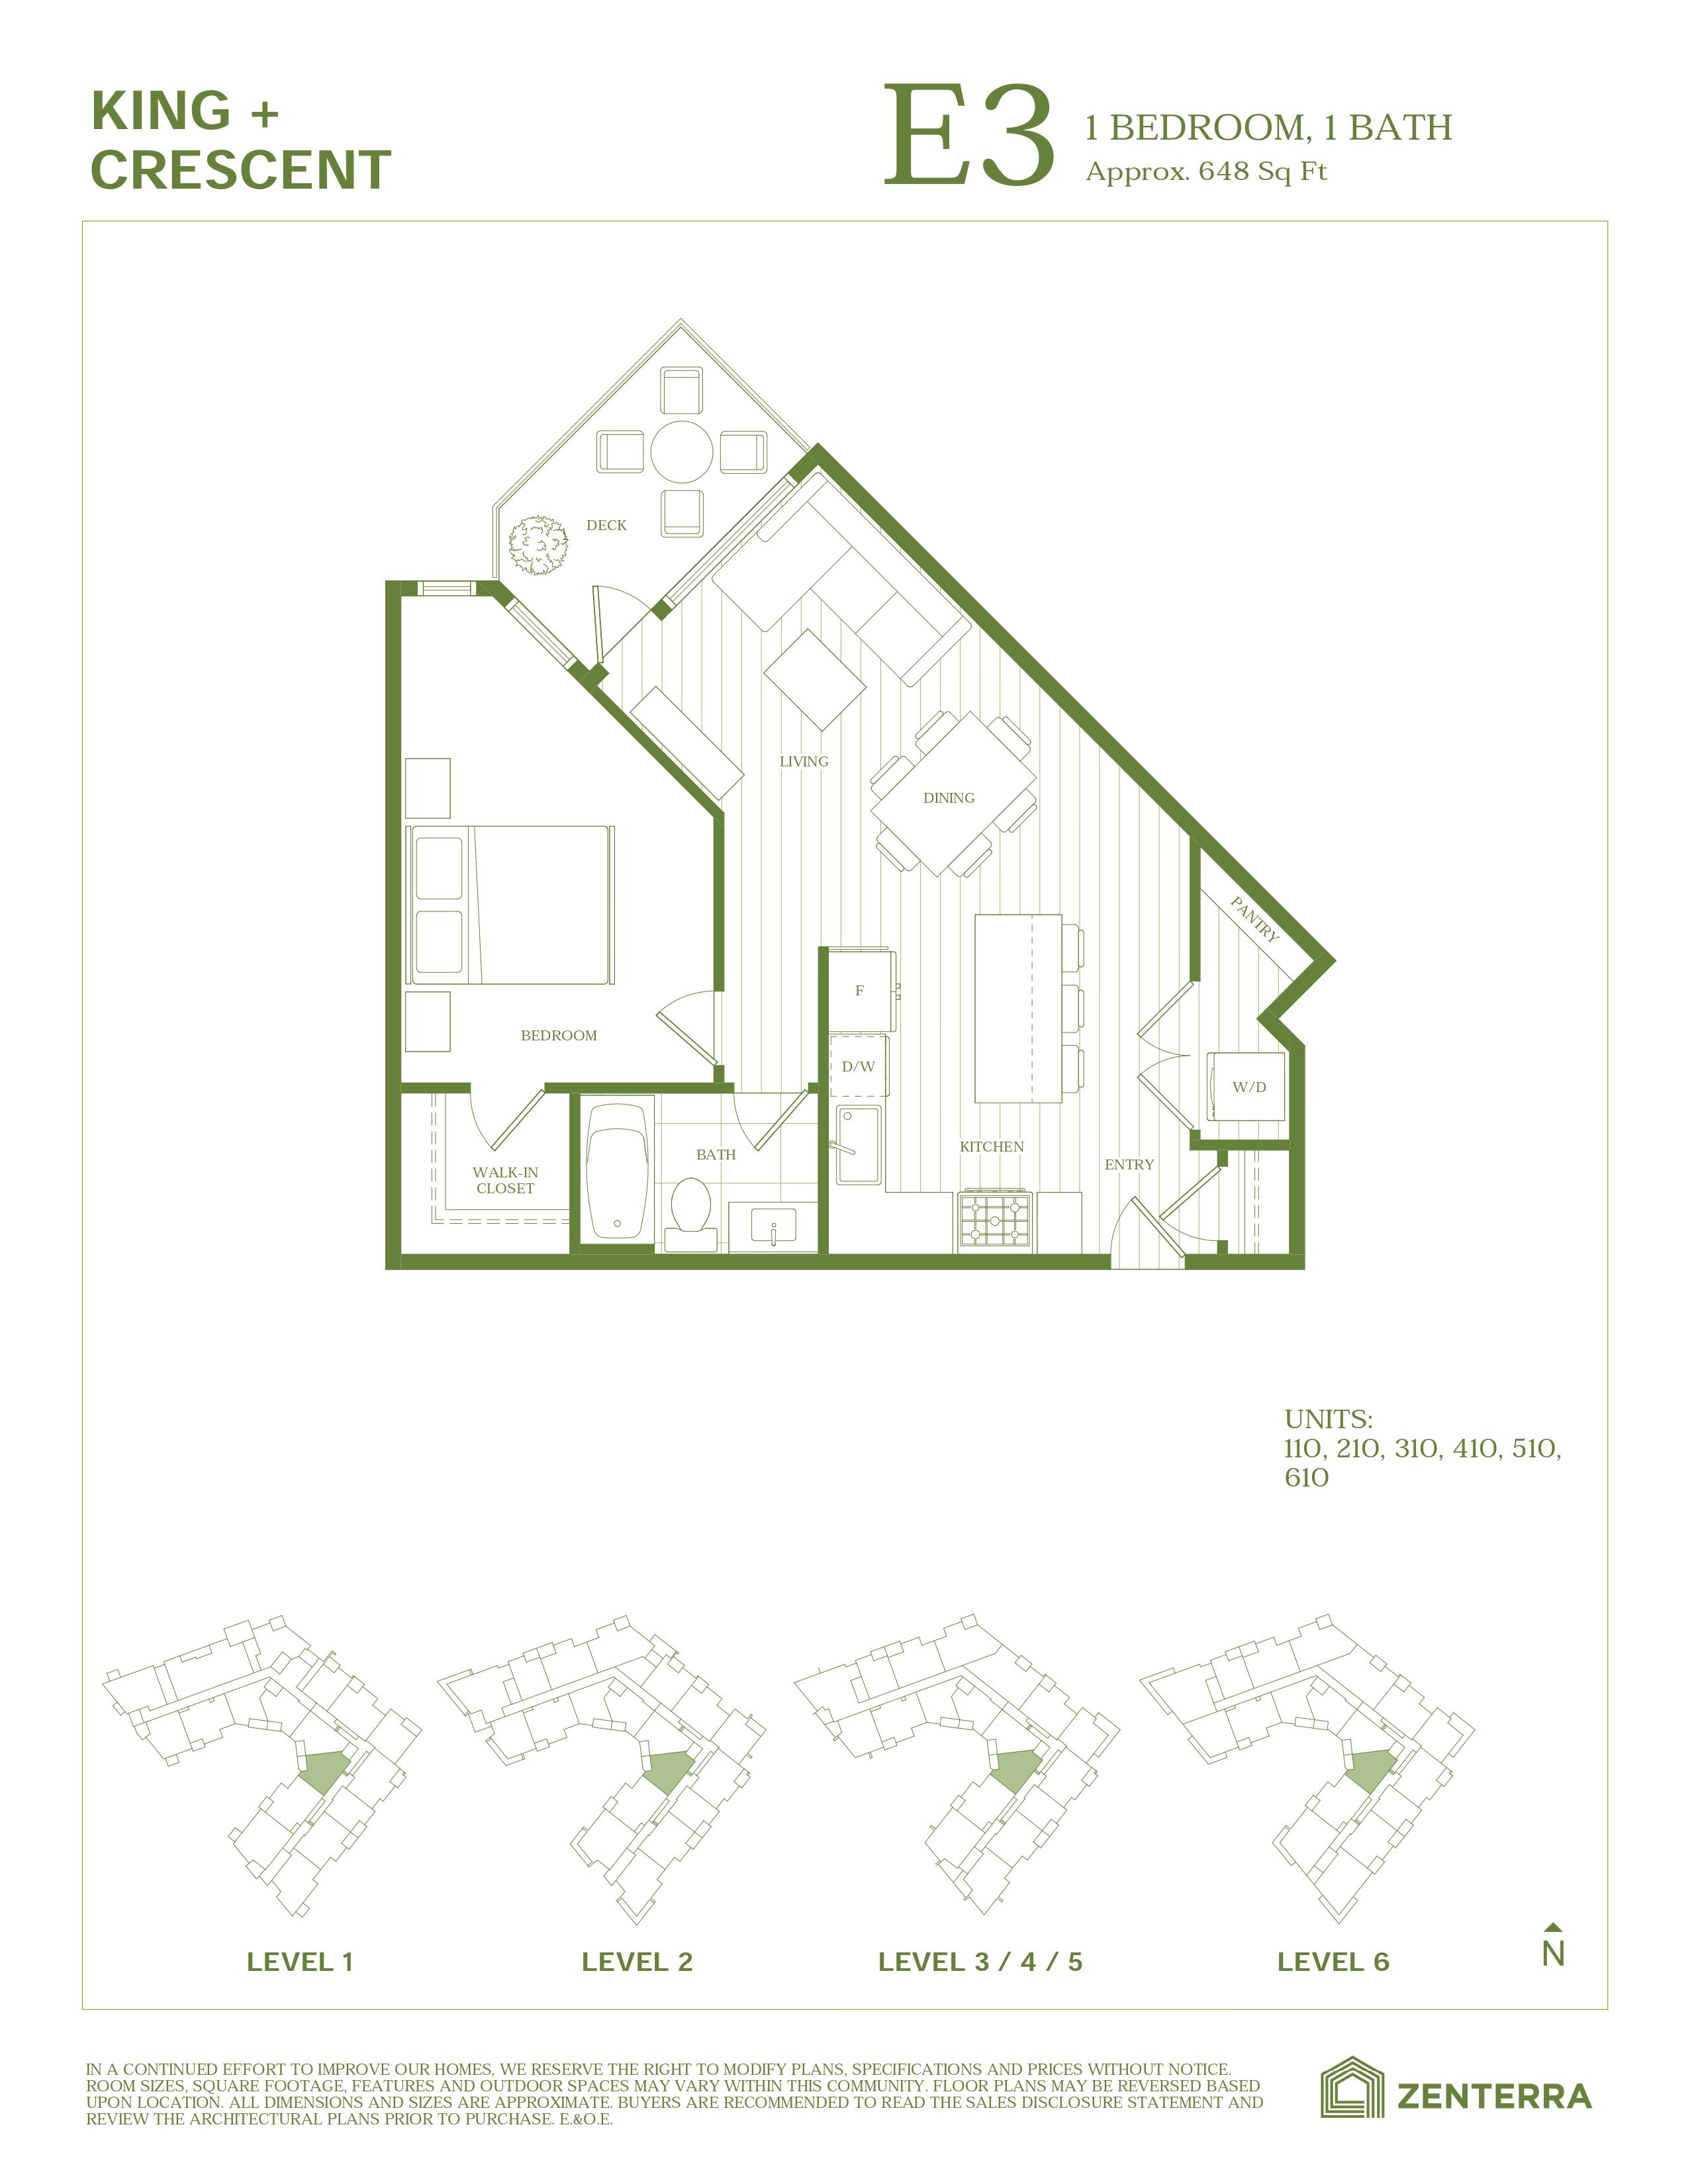 E3 Floor Plan of King + Crescent Condos with undefined beds